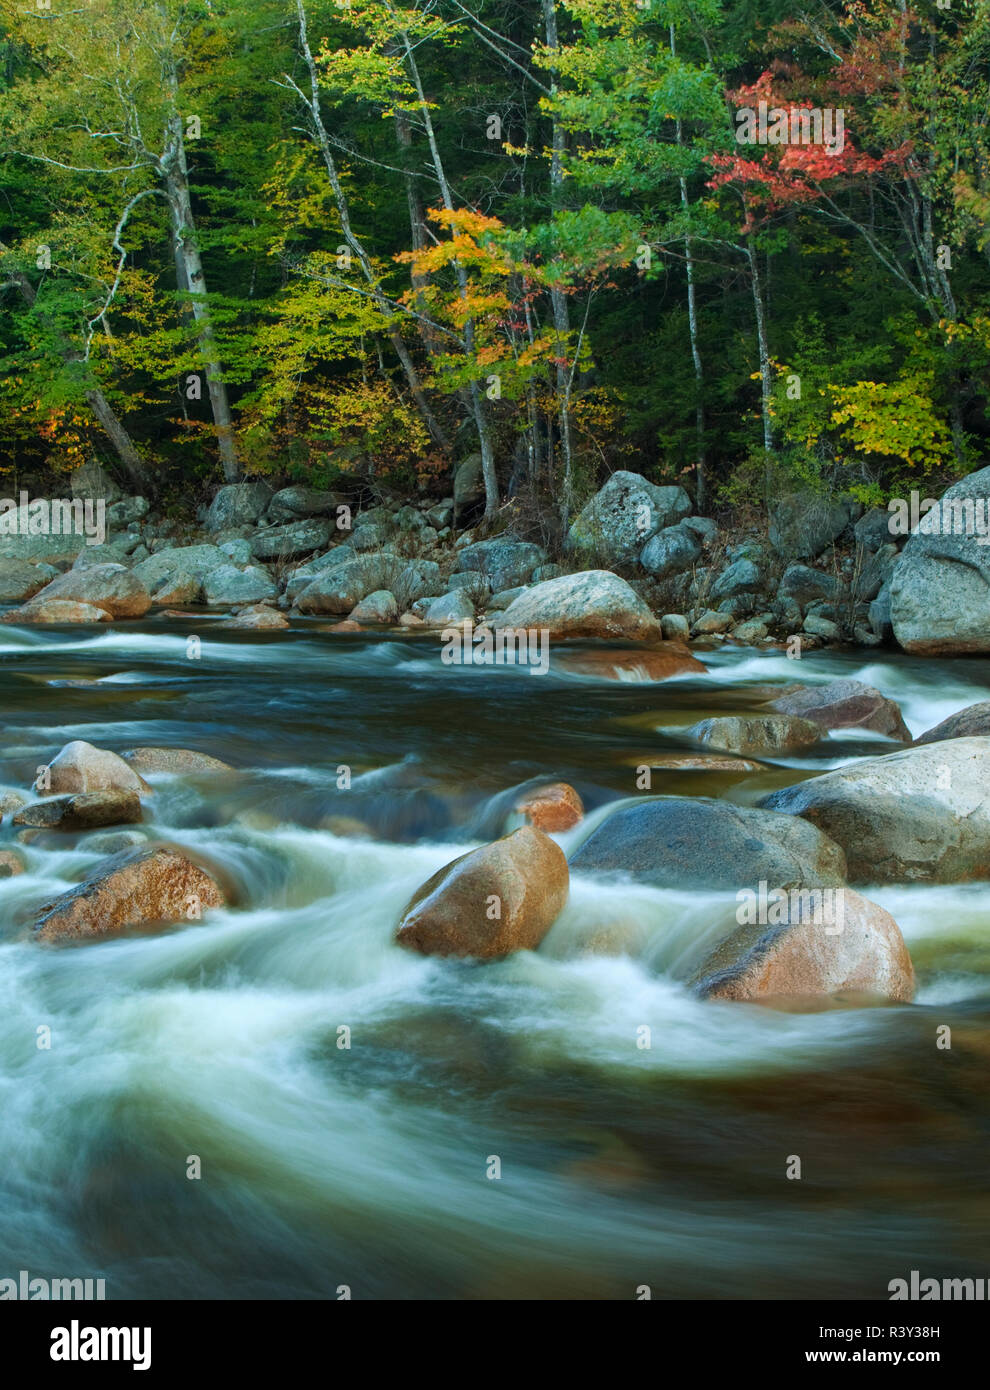 USA, New Hampshire. Autumn trees and flowing river. Stock Photo